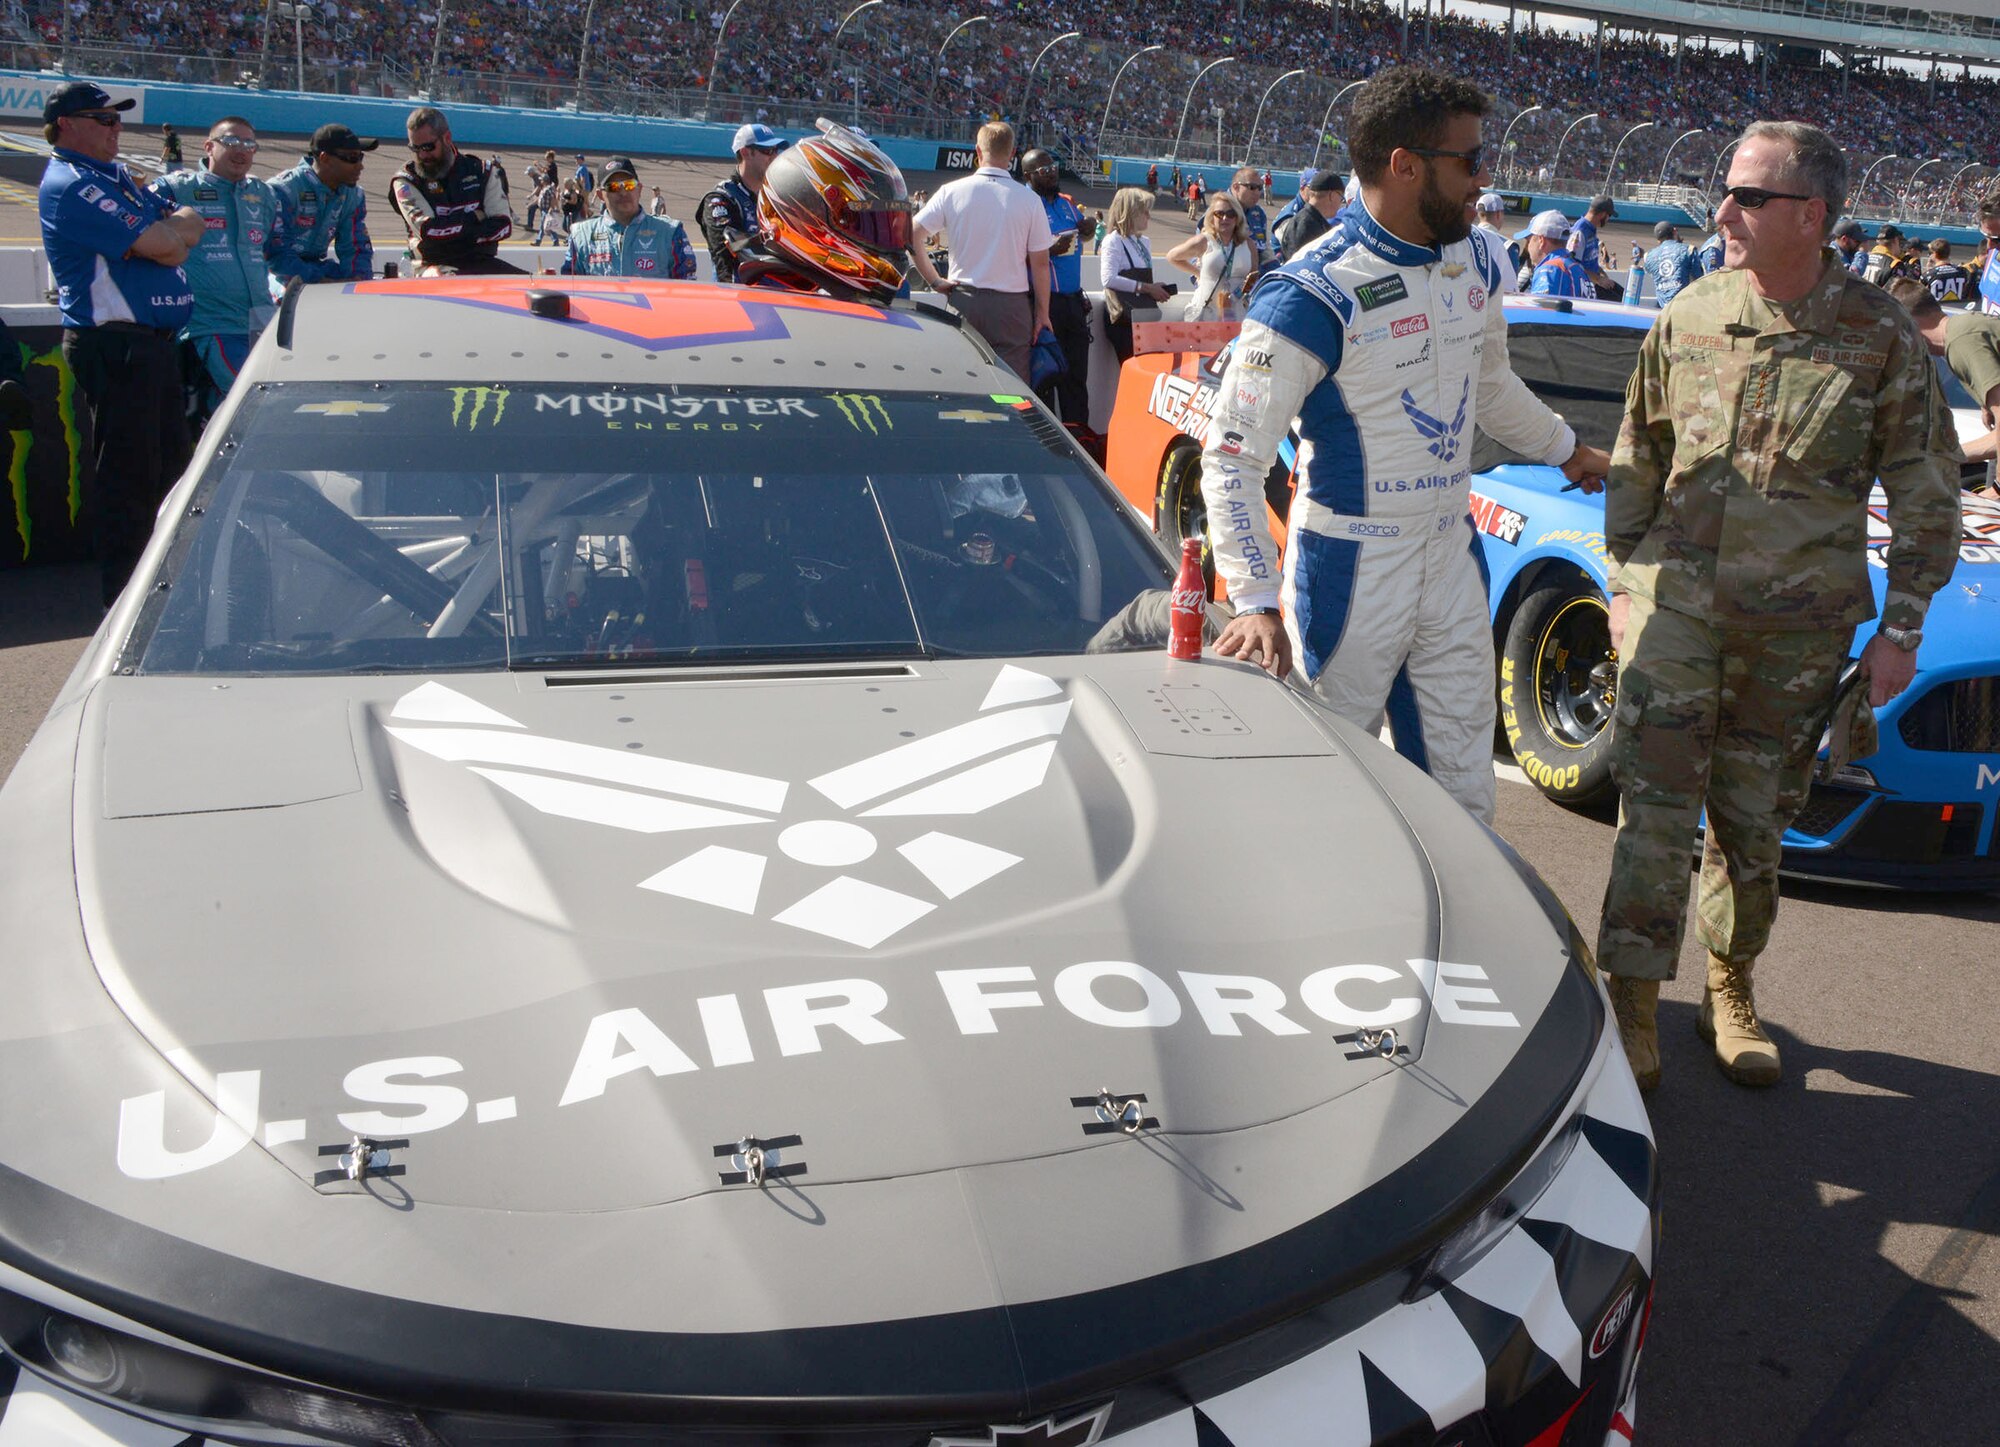 Bubba Wallace, the driver of the Air Force car, talks to Gen. David L. Goldfein, Air Force chief of staff, moments before the start of the Bluegreen Vacations 500 NASCAR race in Phoenix